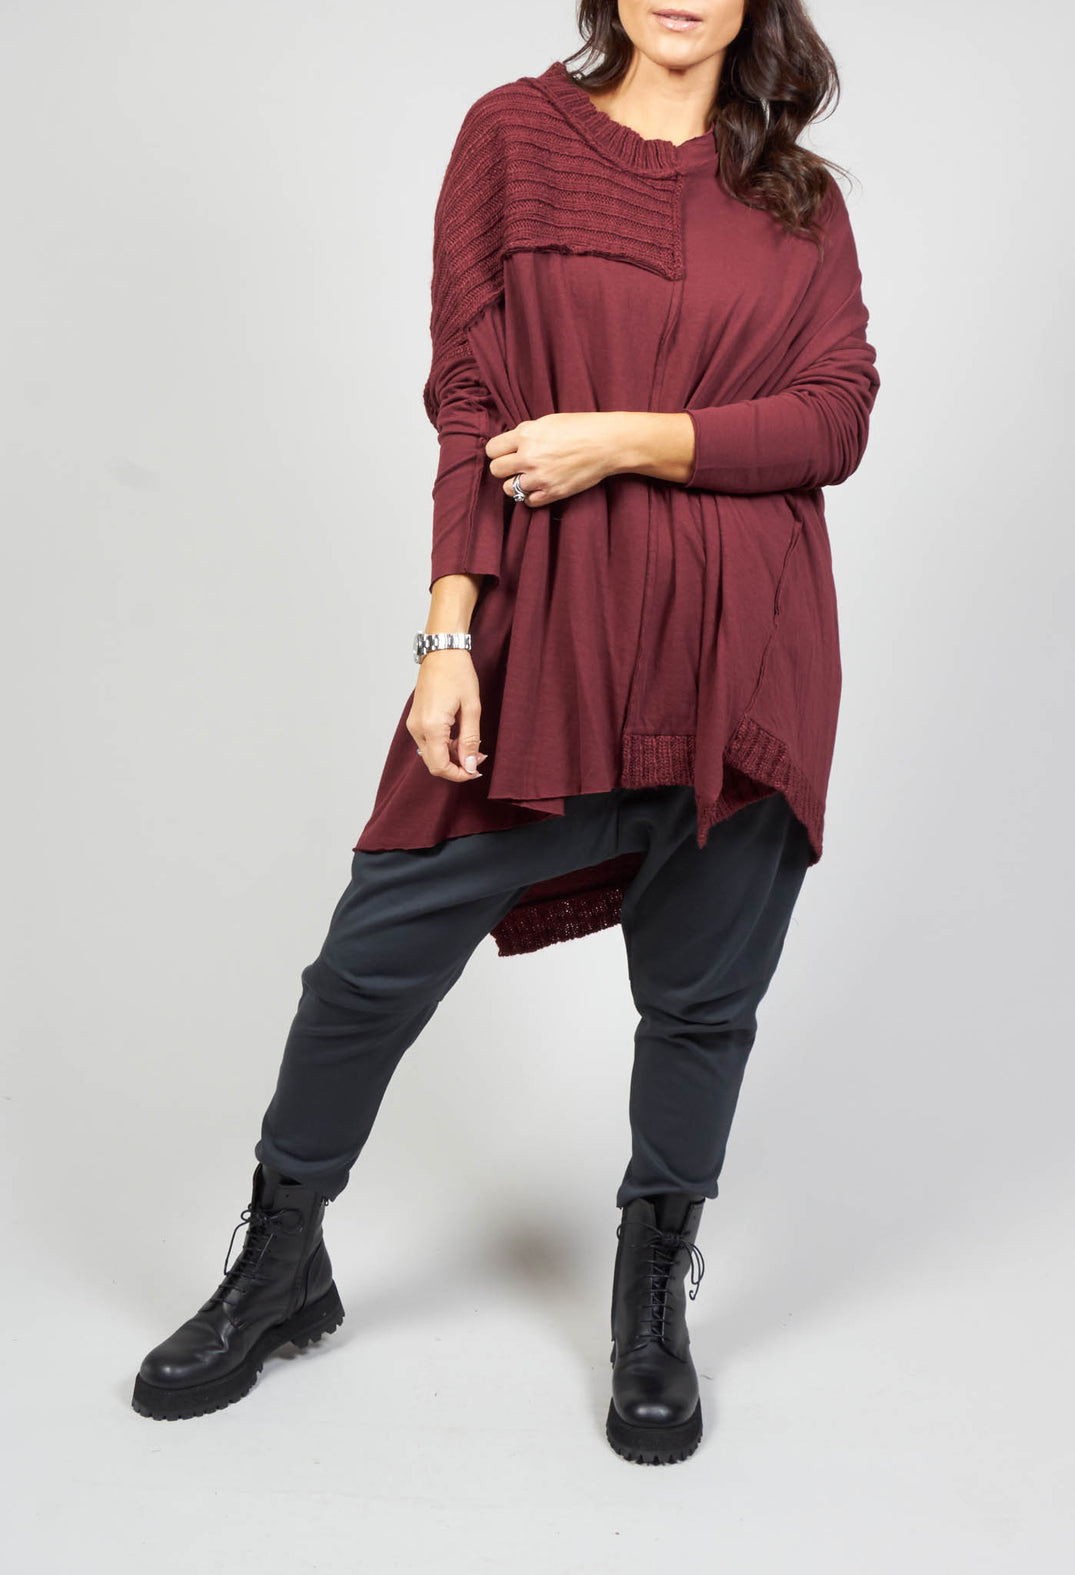 Relaxed Fit Jumper with Rib Detail in Wine